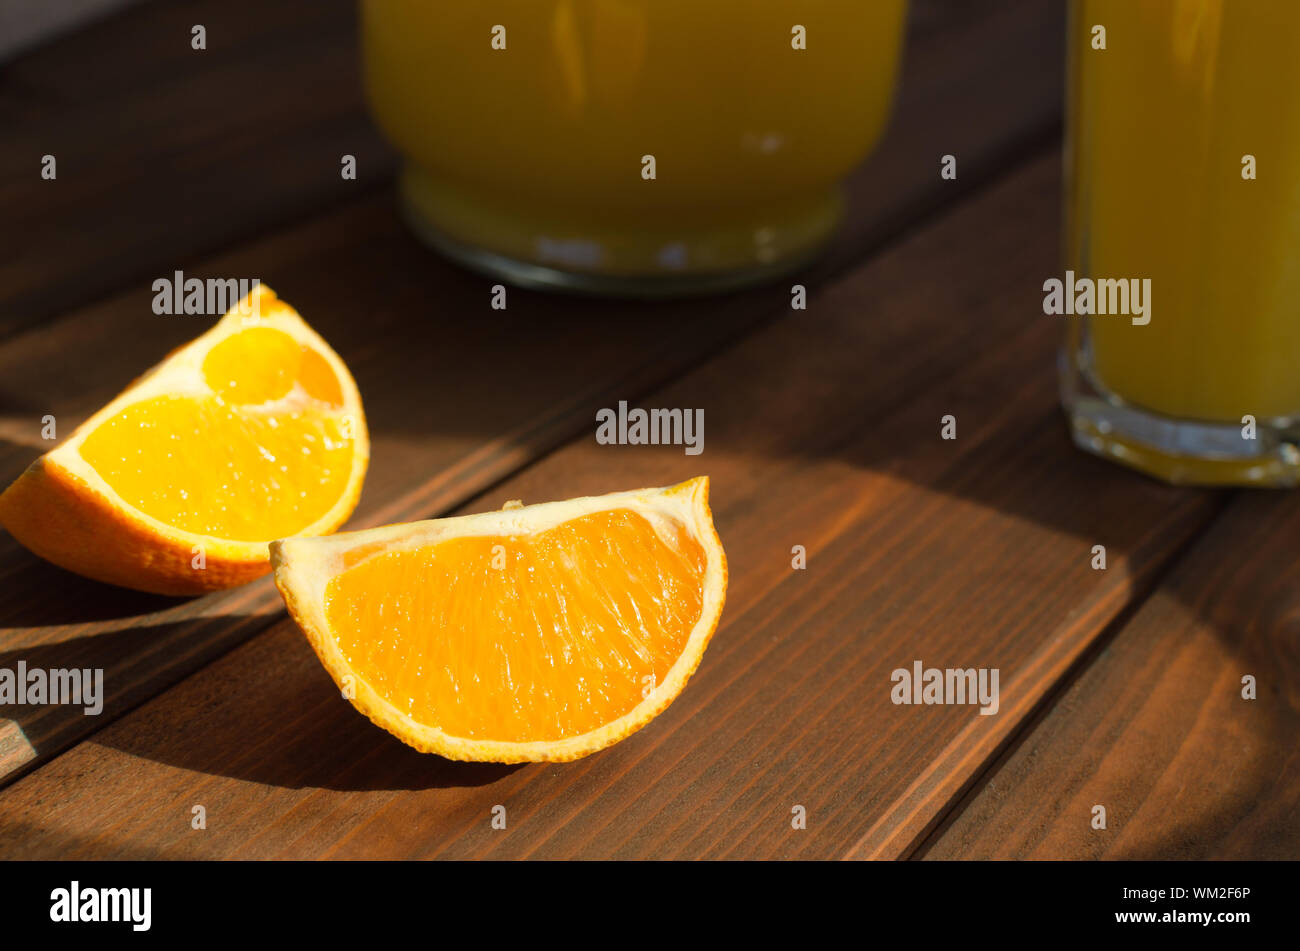 Simple picture orange with fresch juice on table Stock Photo